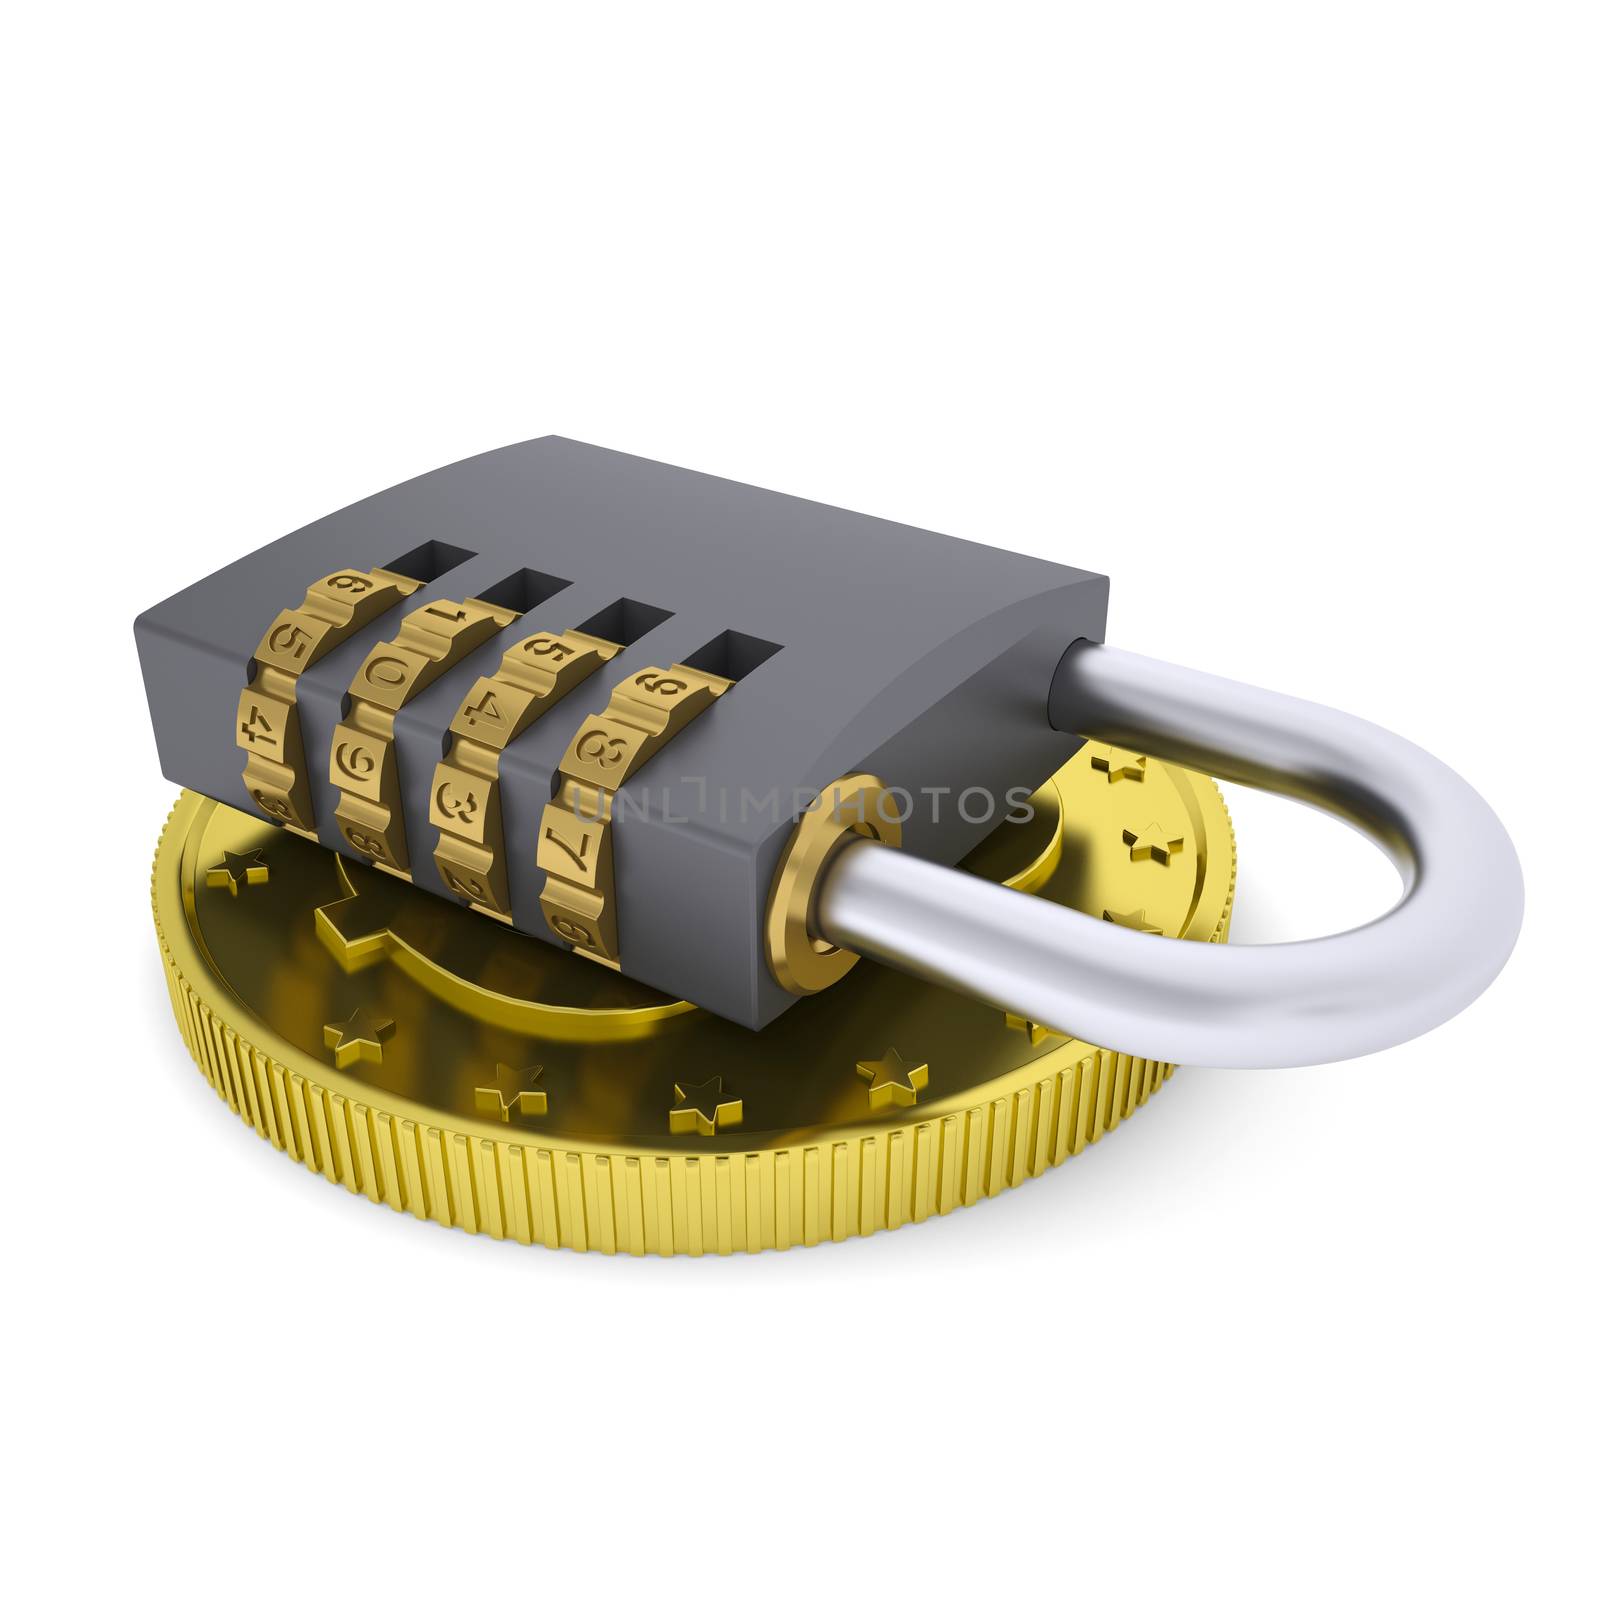 Golden Dollar and combination lock by cherezoff